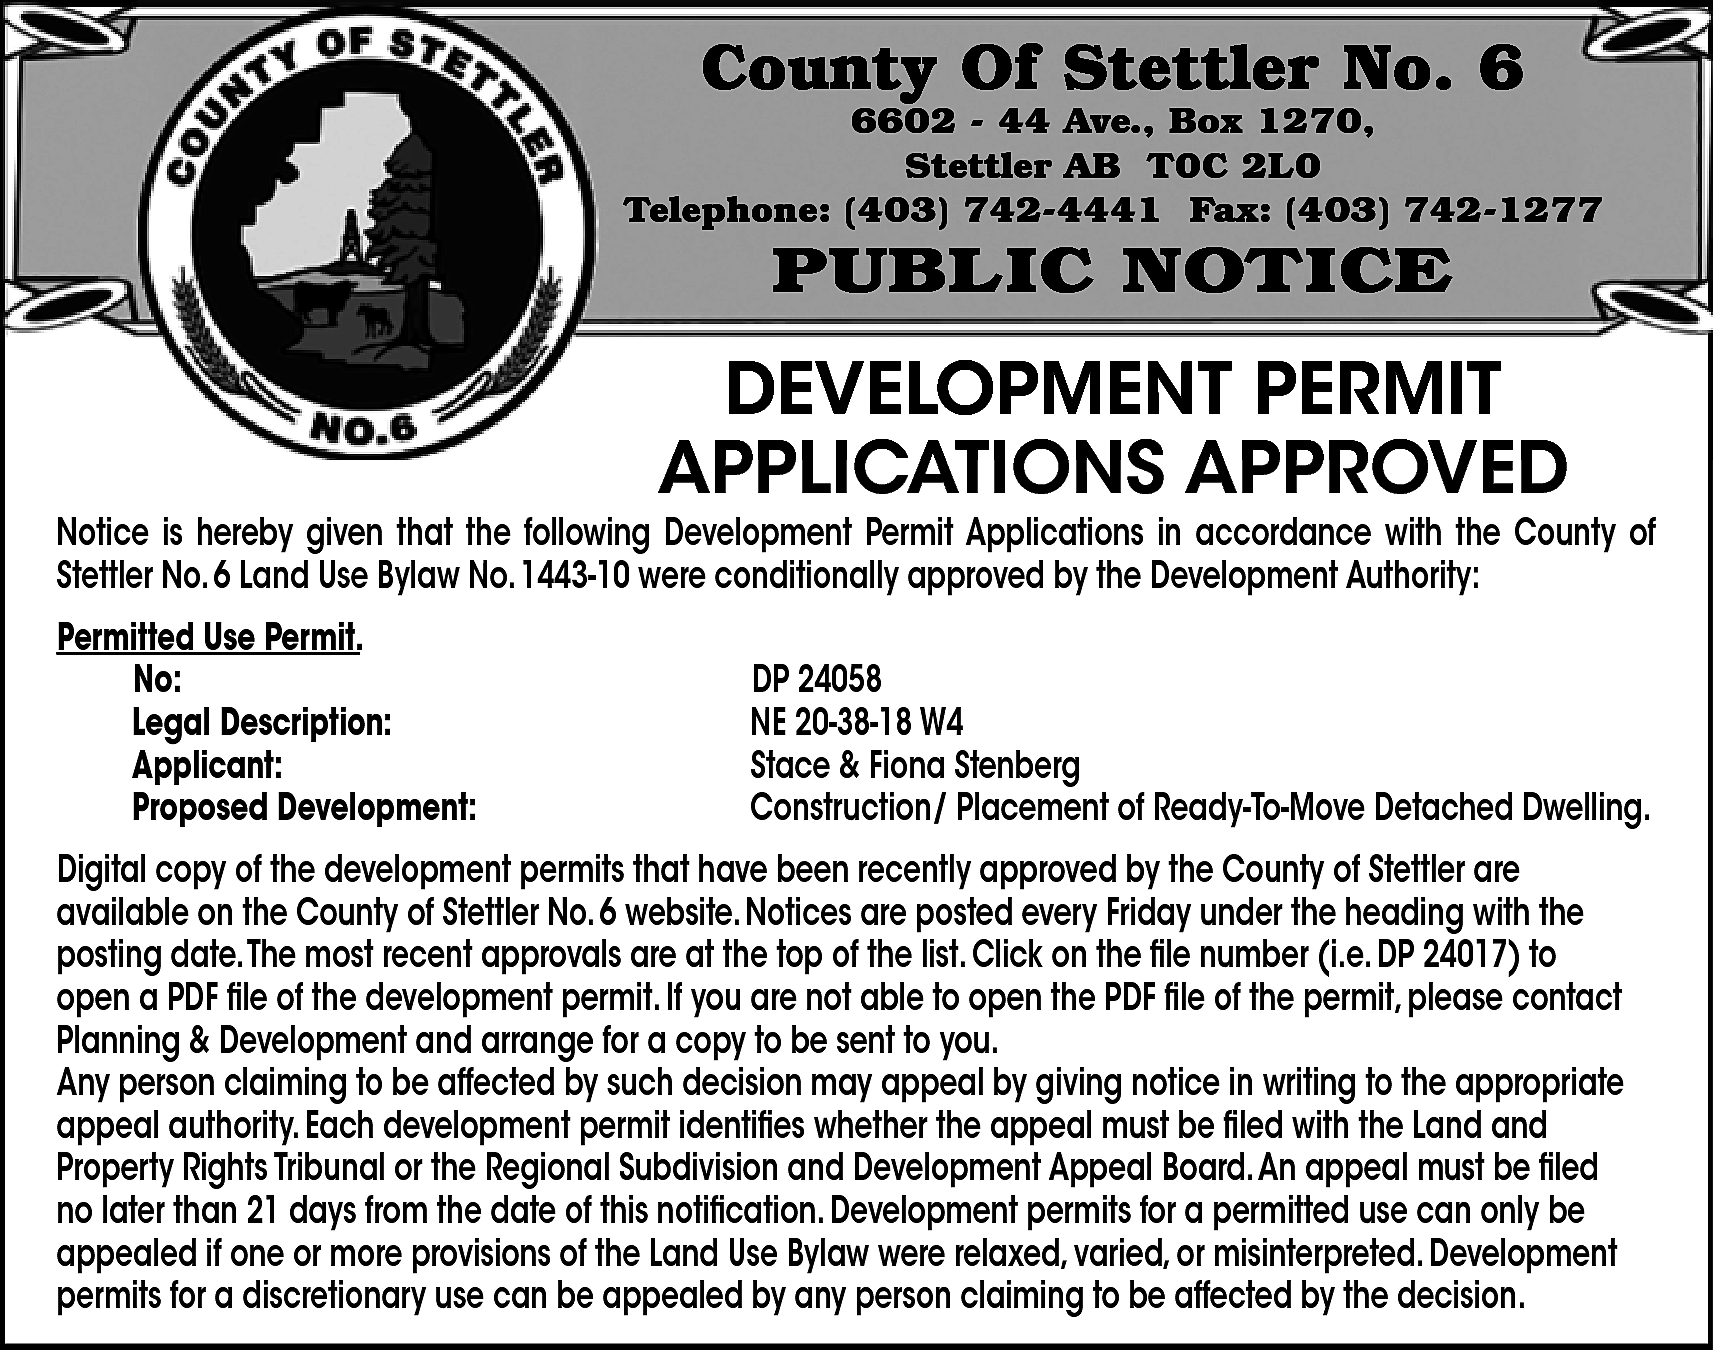 County Of Stettler No. 6  County Of Stettler No. 6    6602 - 44 Ave., Box 1270,  Stettler AB T0C 2L0  Telephone: (403) 742-4441 Fax: (403) 742-1277    PUBLIC NOTICE    DEVELOPMENT PERMIT  APPLICATIONS APPROVED    Notice is hereby given that the following Development Permit Applications in accordance with the County of  Stettler No. 6 Land Use Bylaw No. 1443-10 were conditionally approved by the Development Authority:  Permitted Use Permit.  No:  Legal Description:  Applicant:  Proposed Development:    DP 24058  NE 20-38-18 W4  Stace & Fiona Stenberg  Construction/ Placement of Ready-To-Move Detached Dwelling.    Digital copy of the development permits that have been recently approved by the County of Stettler are  available on the County of Stettler No. 6 website. Notices are posted every Friday under the heading with the  posting date.The most recent approvals are at the top of the list. Click on the file number (i.e. DP 24017) to  open a PDF file of the development permit. If you are not able to open the PDF file of the permit, please contact  Planning & Development and arrange for a copy to be sent to you.  Any person claiming to be affected by such decision may appeal by giving notice in writing to the appropriate  appeal authority. Each development permit identifies whether the appeal must be filed with the Land and  Property Rights Tribunal or the Regional Subdivision and Development Appeal Board.An appeal must be filed  no later than 21 days from the date of this notification. Development permits for a permitted use can only be  appealed if one or more provisions of the Land Use Bylaw were relaxed, varied, or misinterpreted. Development  permits for a discretionary use can be appealed by any person claiming to be affected by the decision.    